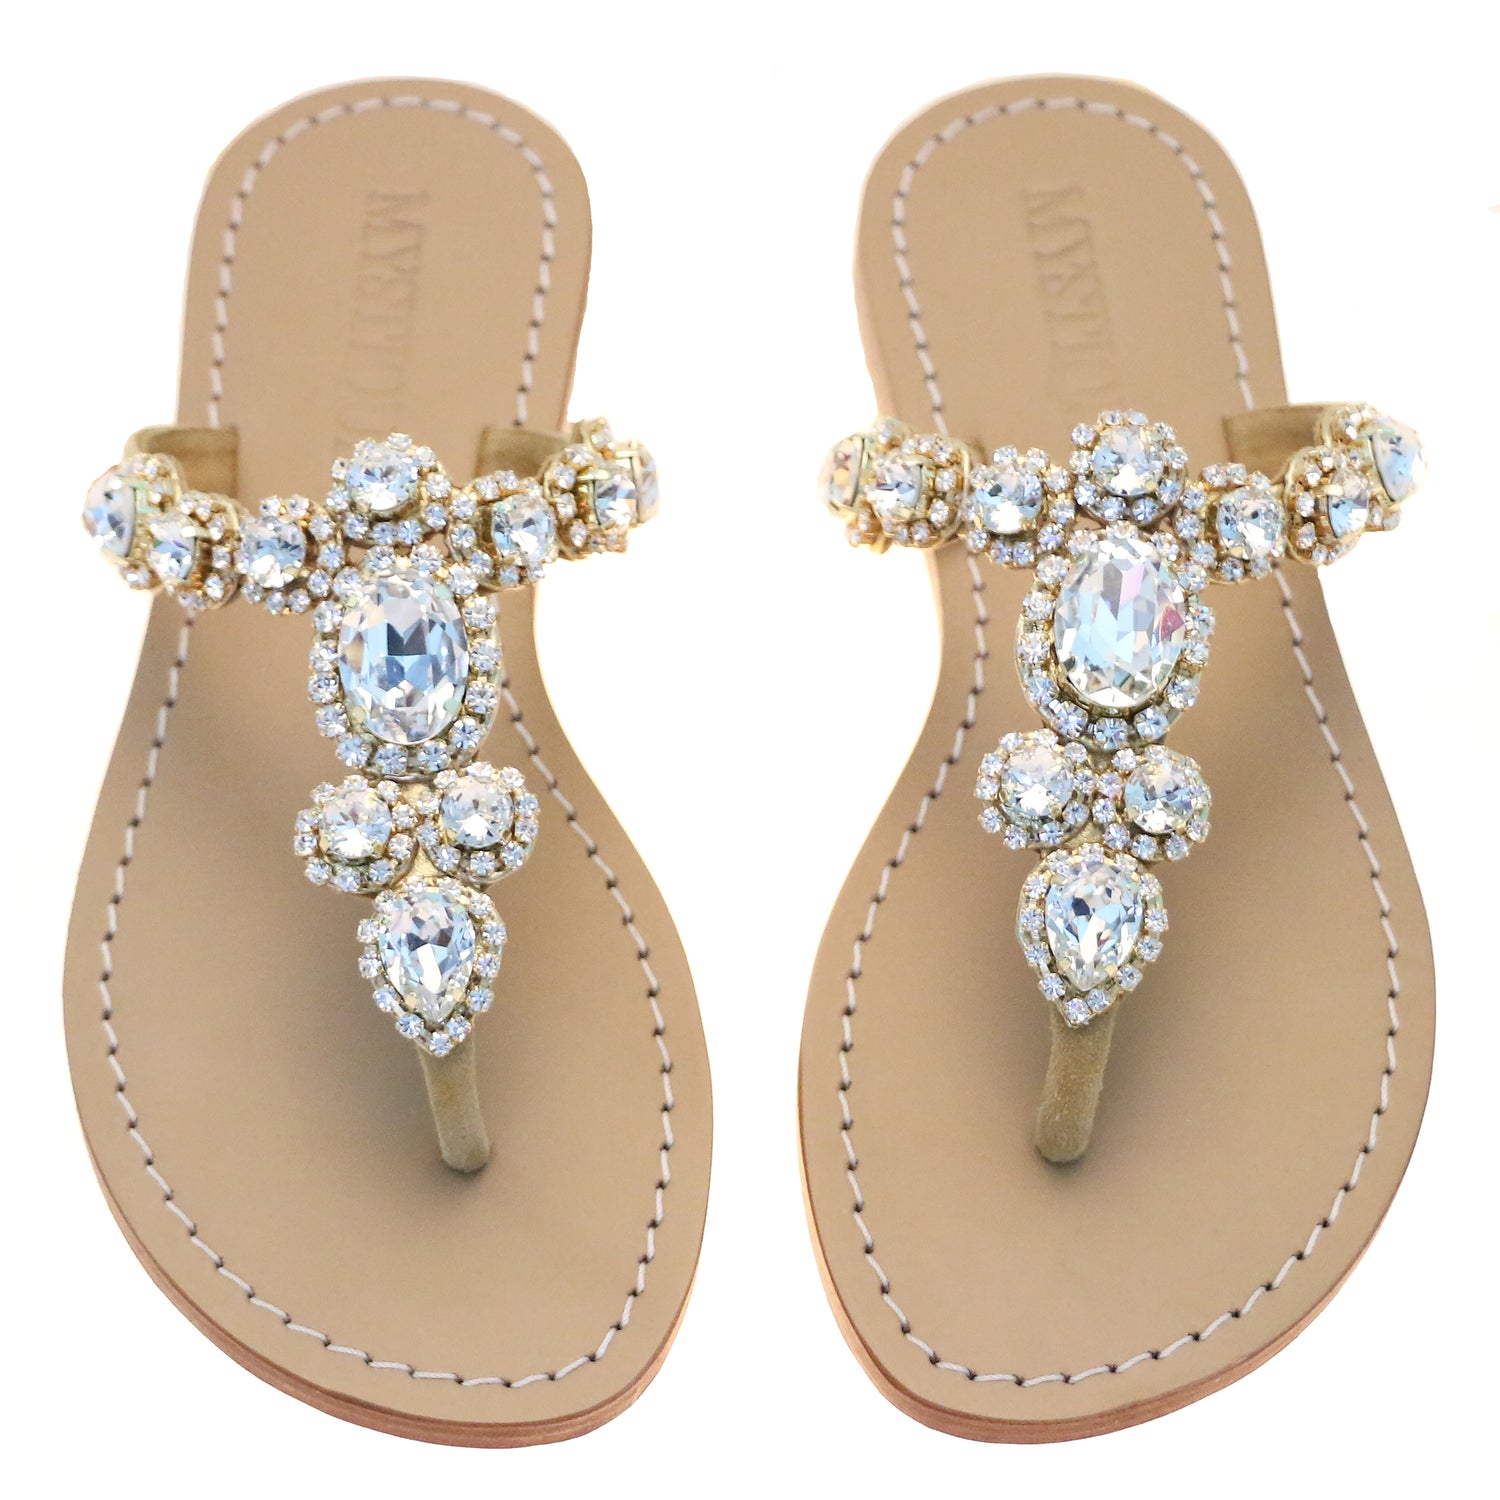 Sicily - Women's Gold Leather Clear Crystal Sandals | Mystique Sandals